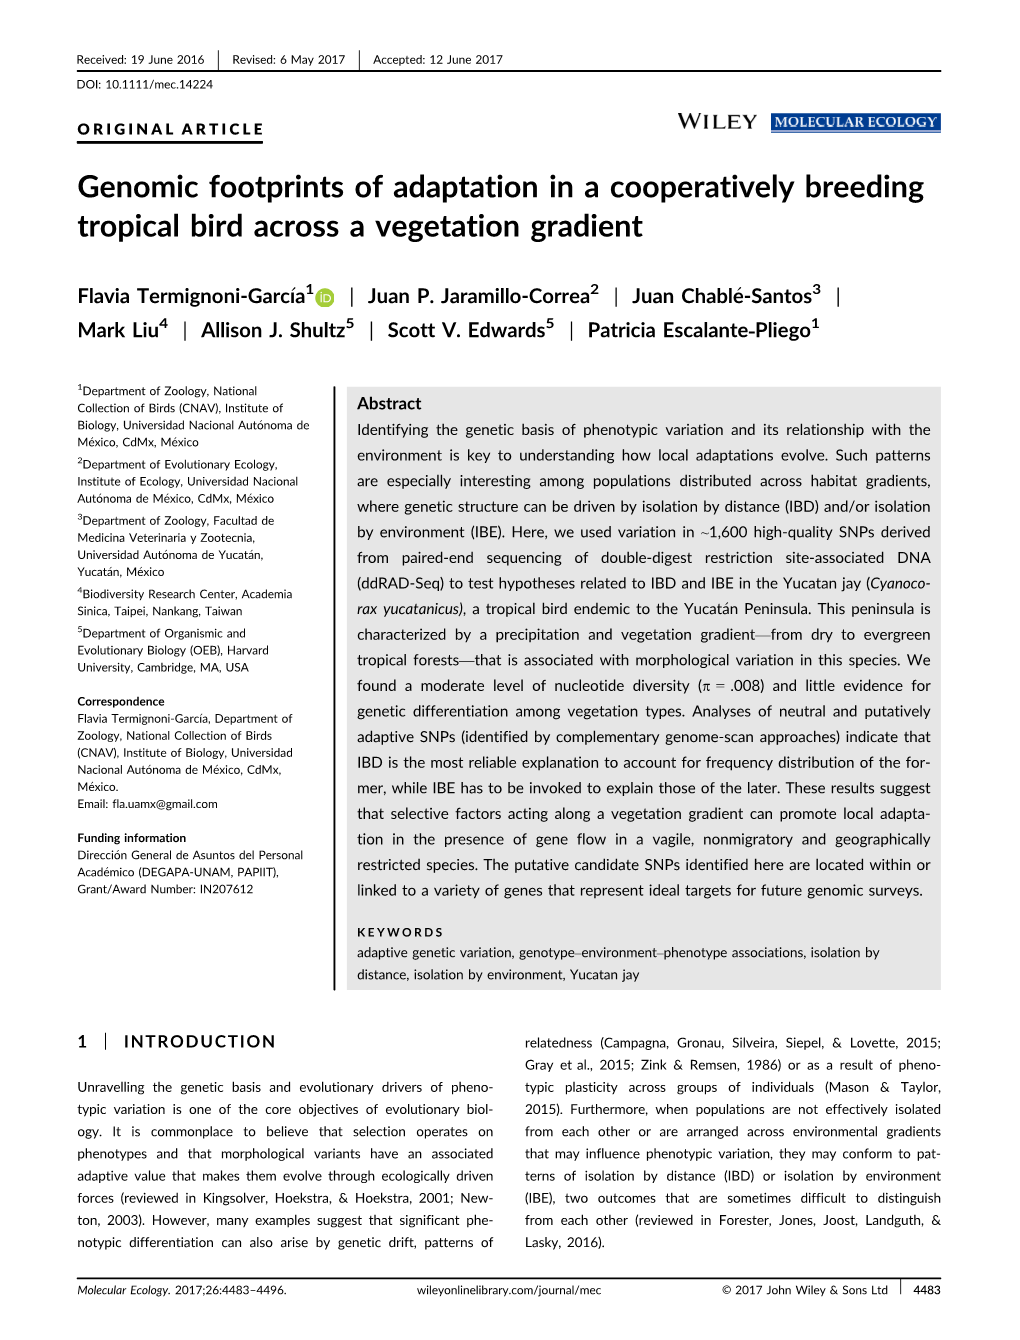 Genomic Footprints of Adaptation in a Cooperatively Breeding Tropical Bird Across a Vegetation Gradient